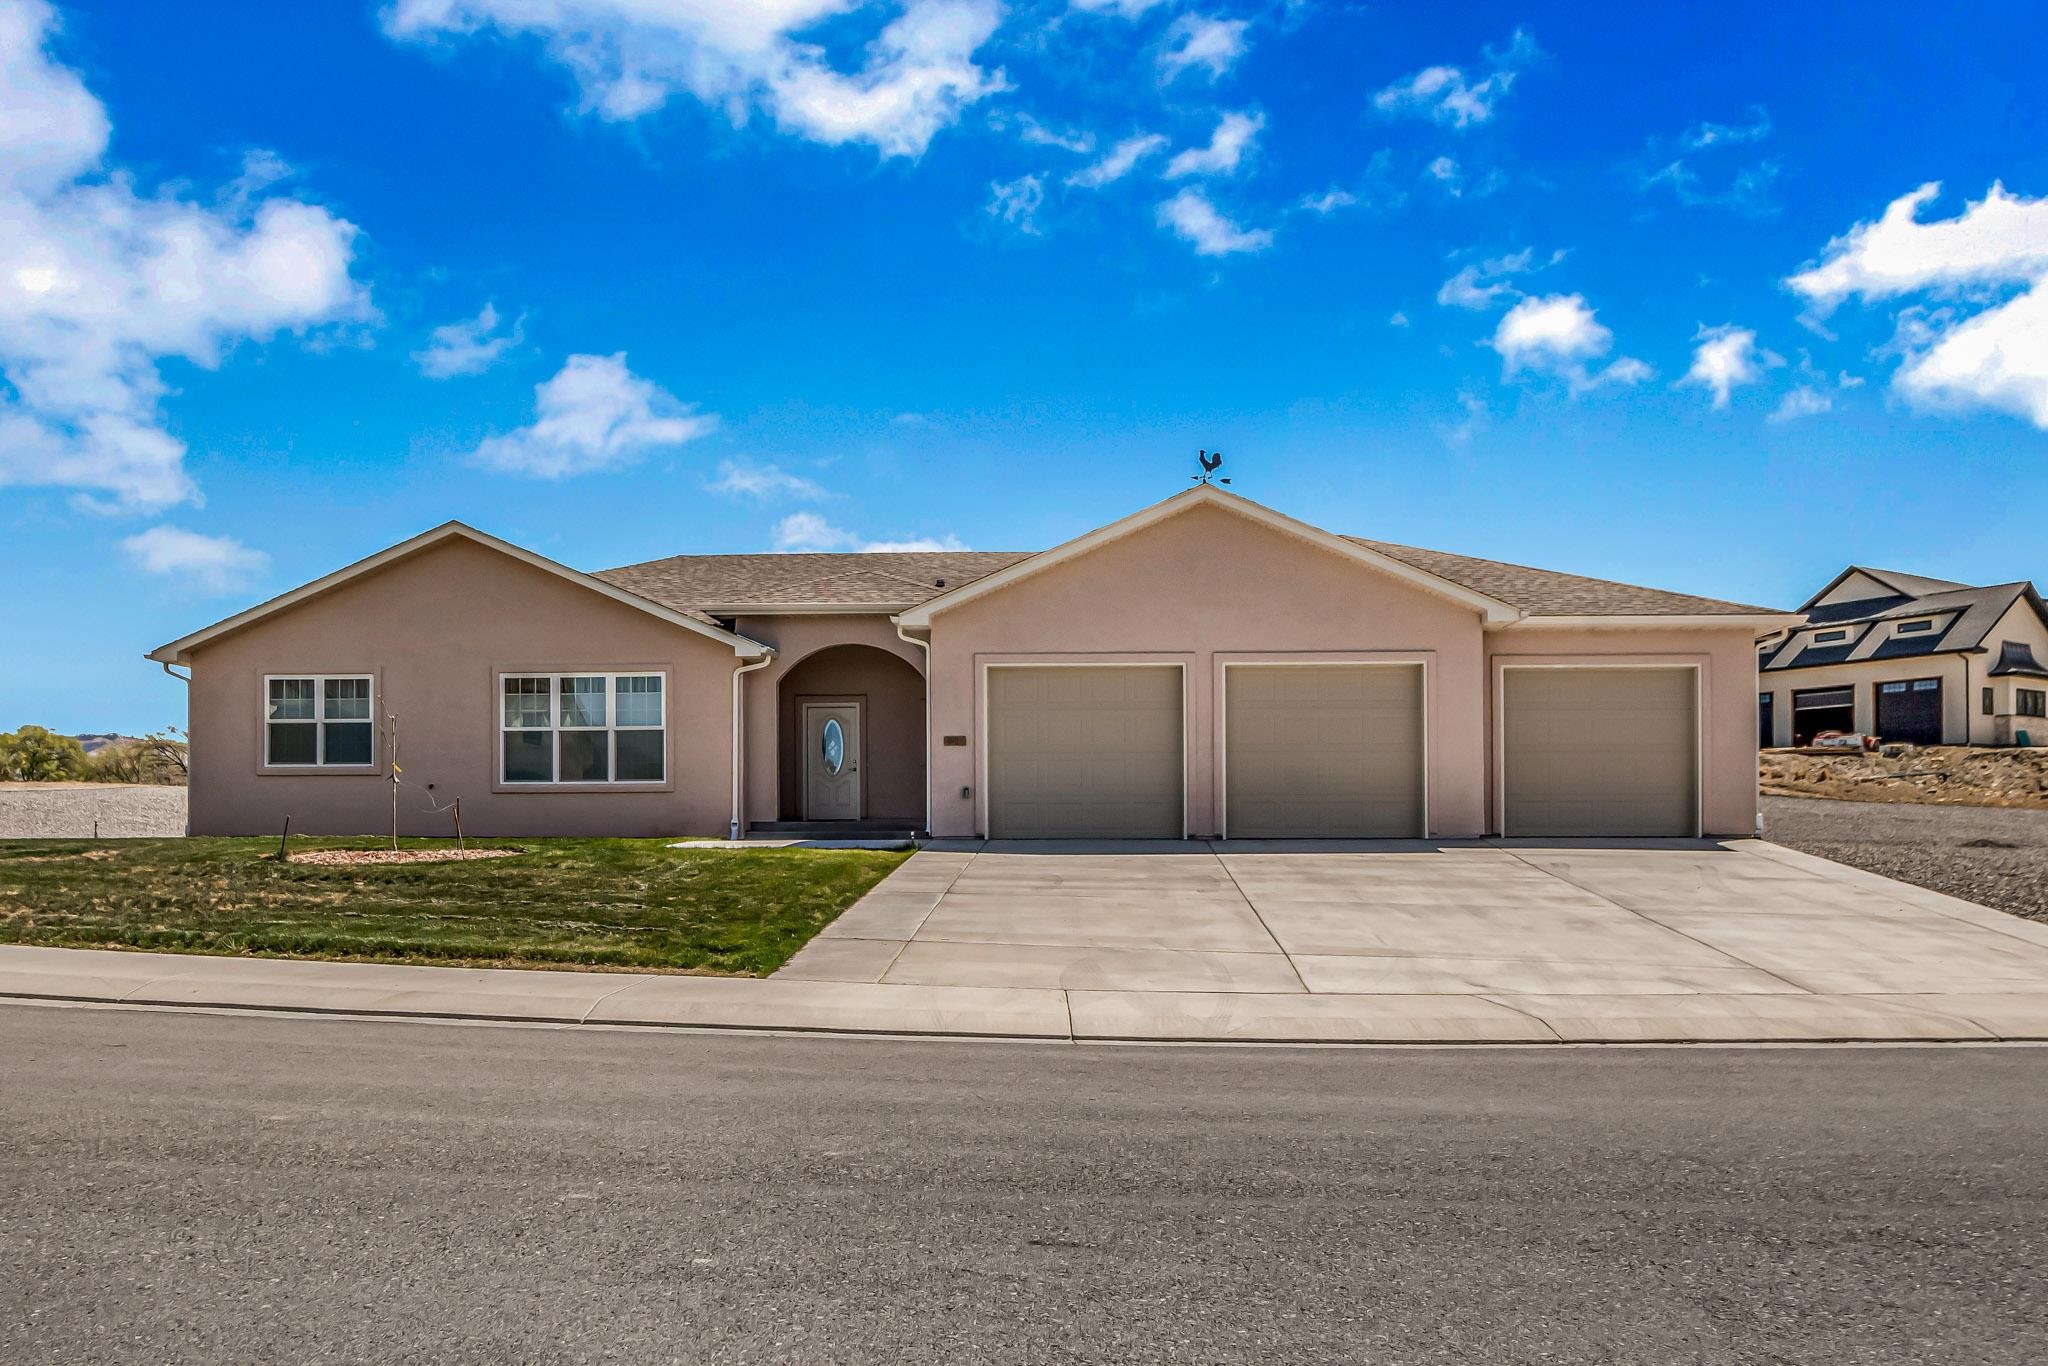 OPEN HOUSE FRIDAY 4/26/2024 FROM 4-7PM. PRIVATE SHOWINGS START SATURDAY 4/27/2024. If you are looking for New Construction in a superb new subdivision in the north, under $900,000, this is the one!  Ranch Style, Built in 2021 but never lived in by anyone! Great Location in the Quail Meadows subdivision. 1 acre lot w/RV parking and move in ready! The large kitchen features a big island, soft close cabinets and drawers, pull out shelves, Pull out Mixer lift stand, stainless high end appliances and great views from window above sink! Easy floor plan with split bedrooms. Primary suite houses a flex/office room for home gym, office, crafts, nursery, library, etc and a 5 piece bath w/ walk in shower and a walk in tub. This home has many ADA features including wide doorways and halls, grab bars, walk in jetted tub, no carpets! Lovely views from front patio and rear east facing patio. Room for a shop too! Come check this out and see all the potential!